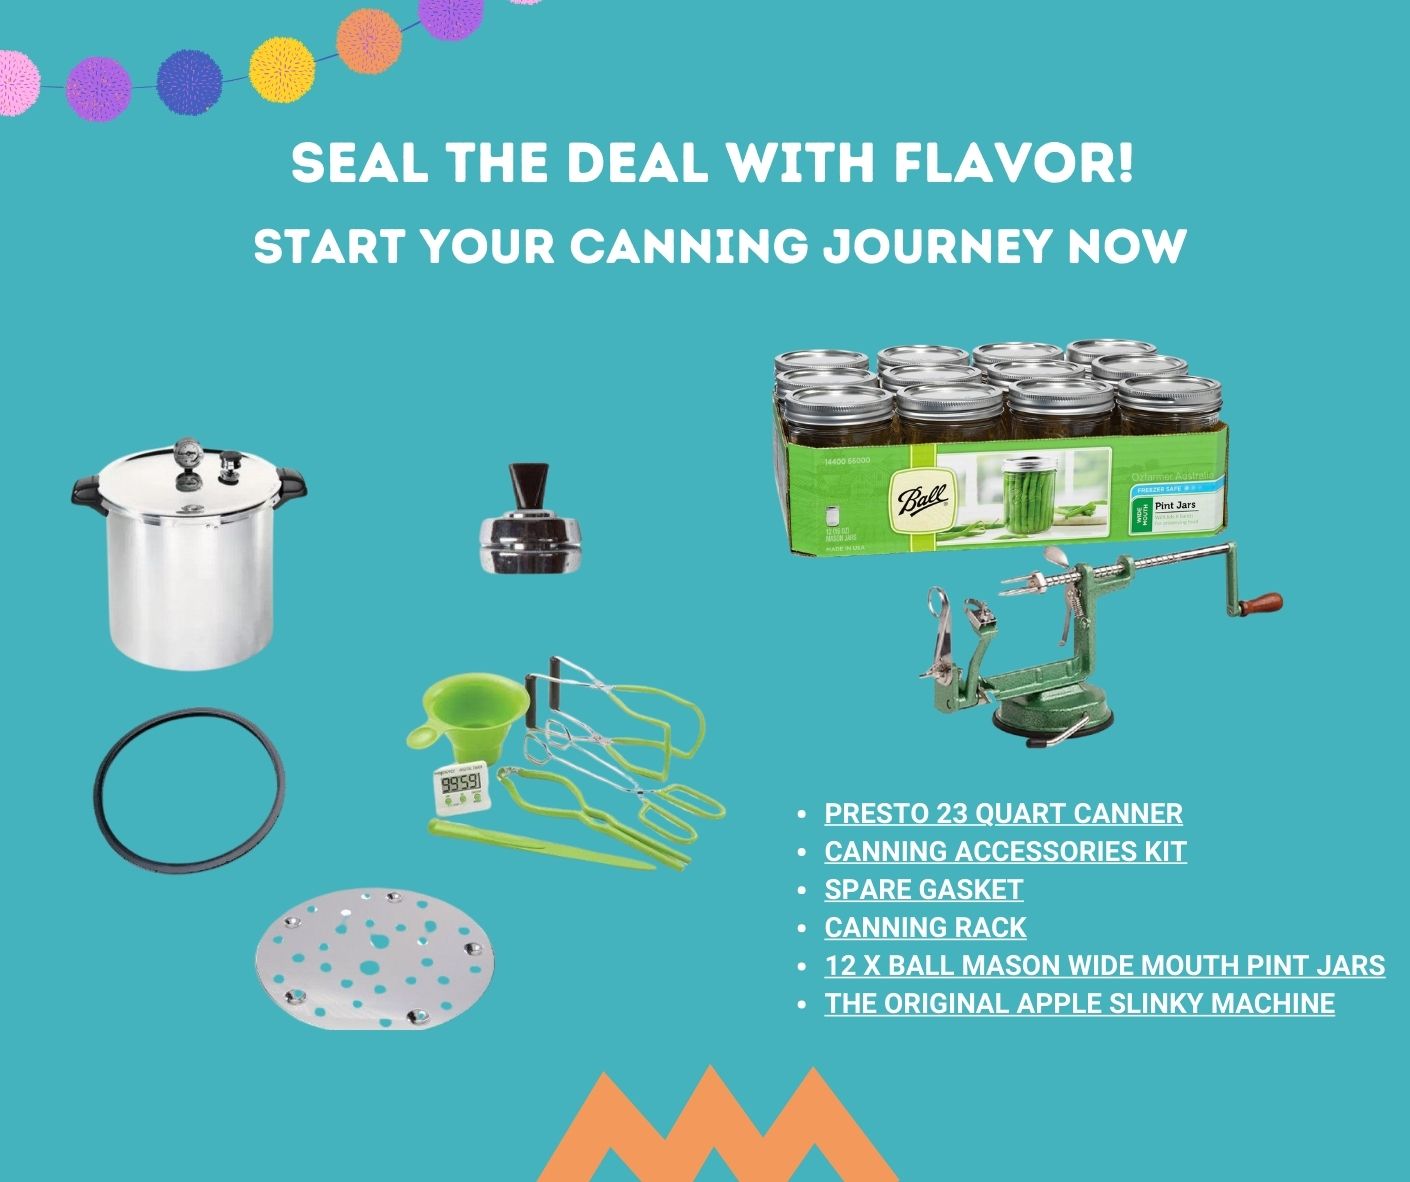 Presto pressure canner starter bundle with an apple slinky machine and a case of Ball Mason jar